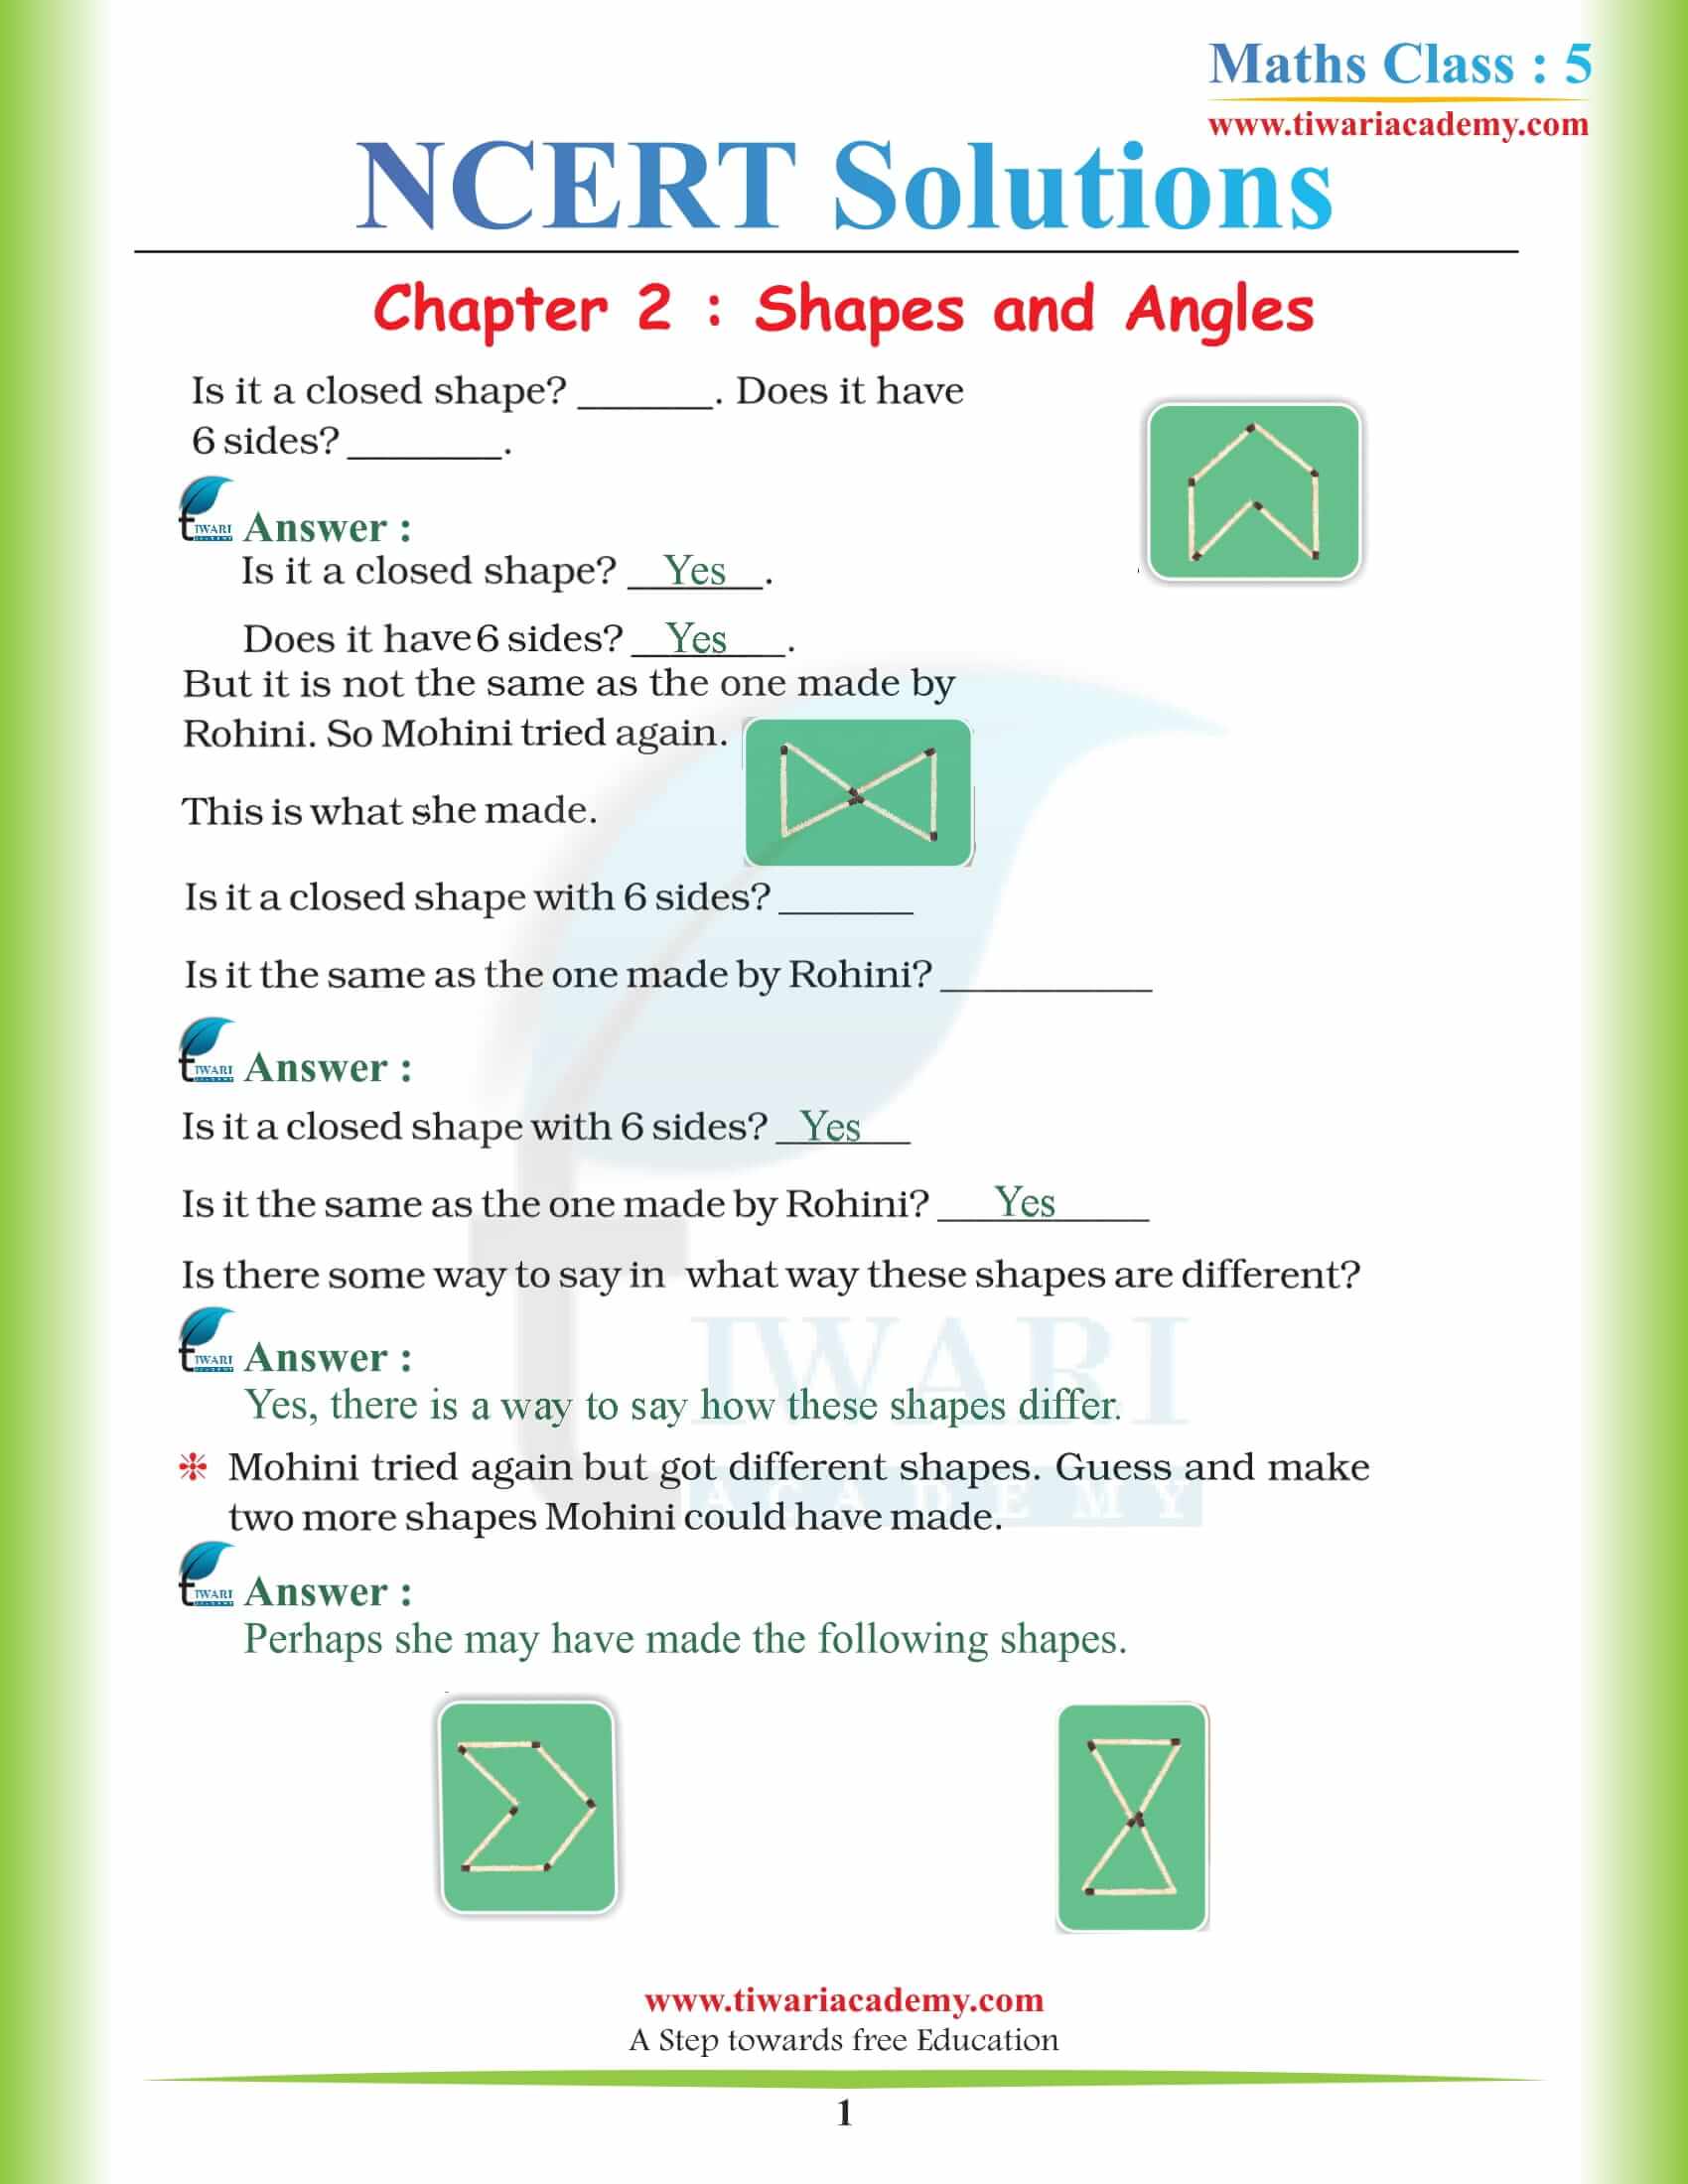 NCERT Solutions for Class 5 Maths Chapter 2 Shapes and Angles